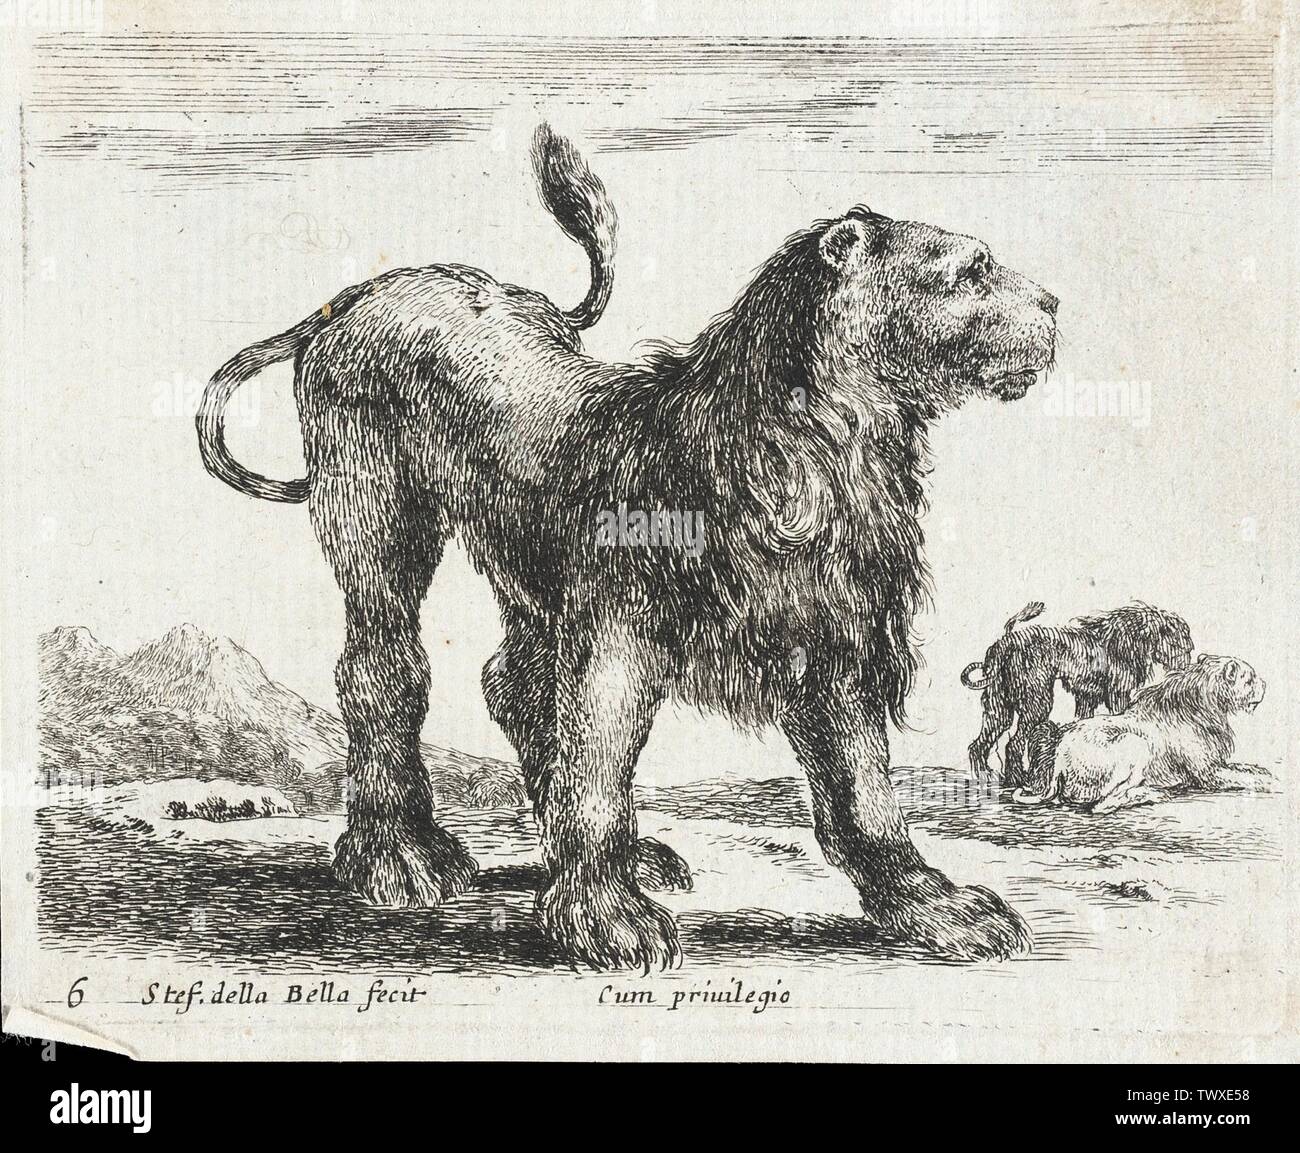 A Lion;  Italy, 1641 Series: Diversi animali, pl. 6 Prints; etchings Etching Gift of Alfred and Esther Norris (M.83.318.7) Prints and Drawings; 1641date QS:P571,+1641-00-00T00:00:00Z/9; Stock Photo